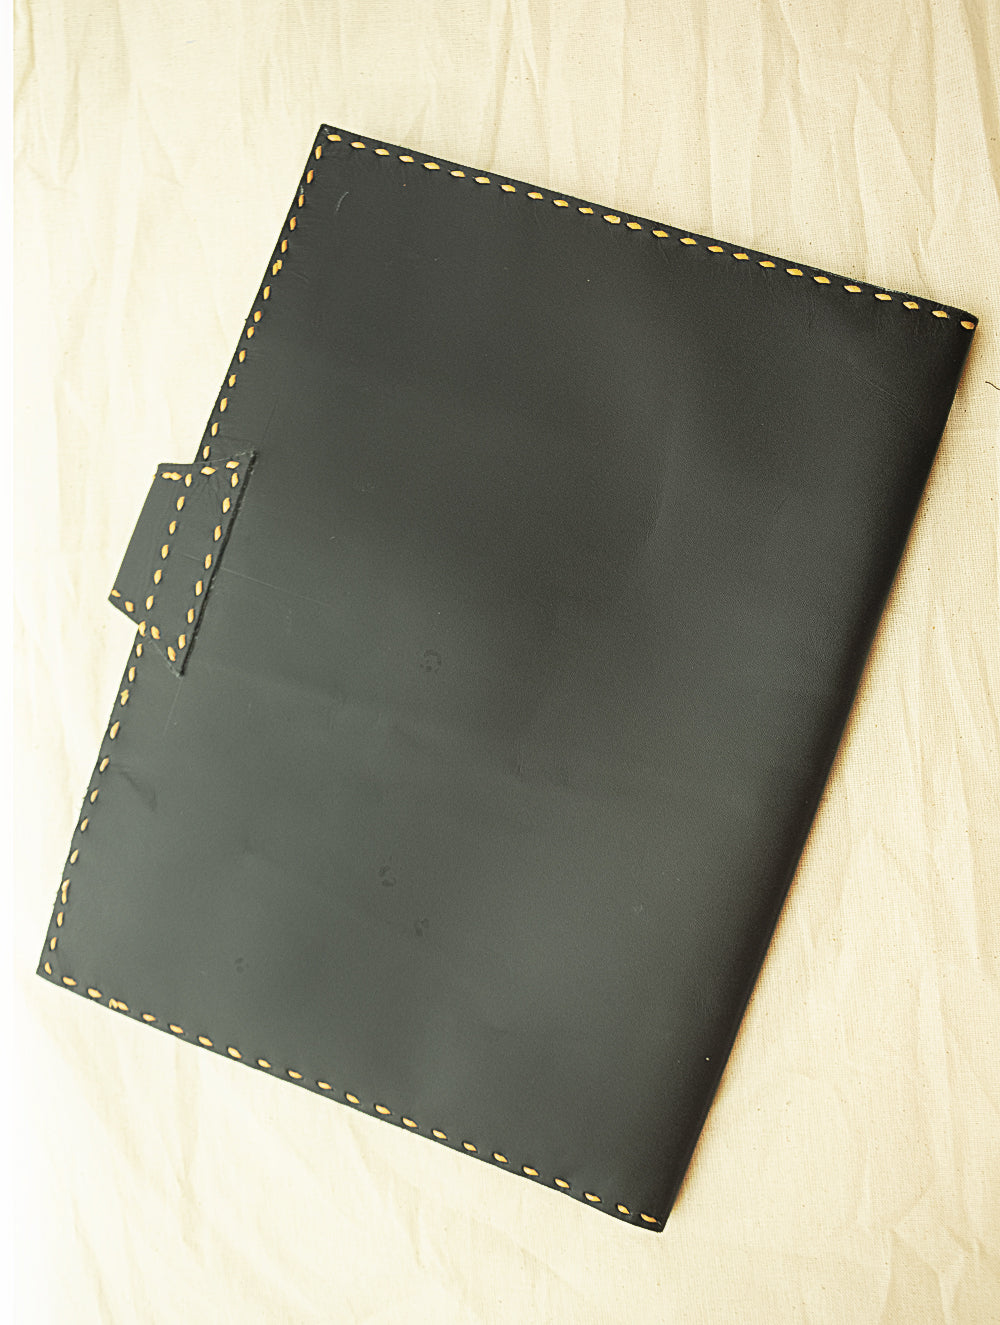 Load image into Gallery viewer, Handcrafted Leather Utility Folder with Hand Stitch Detail - The India Craft House 